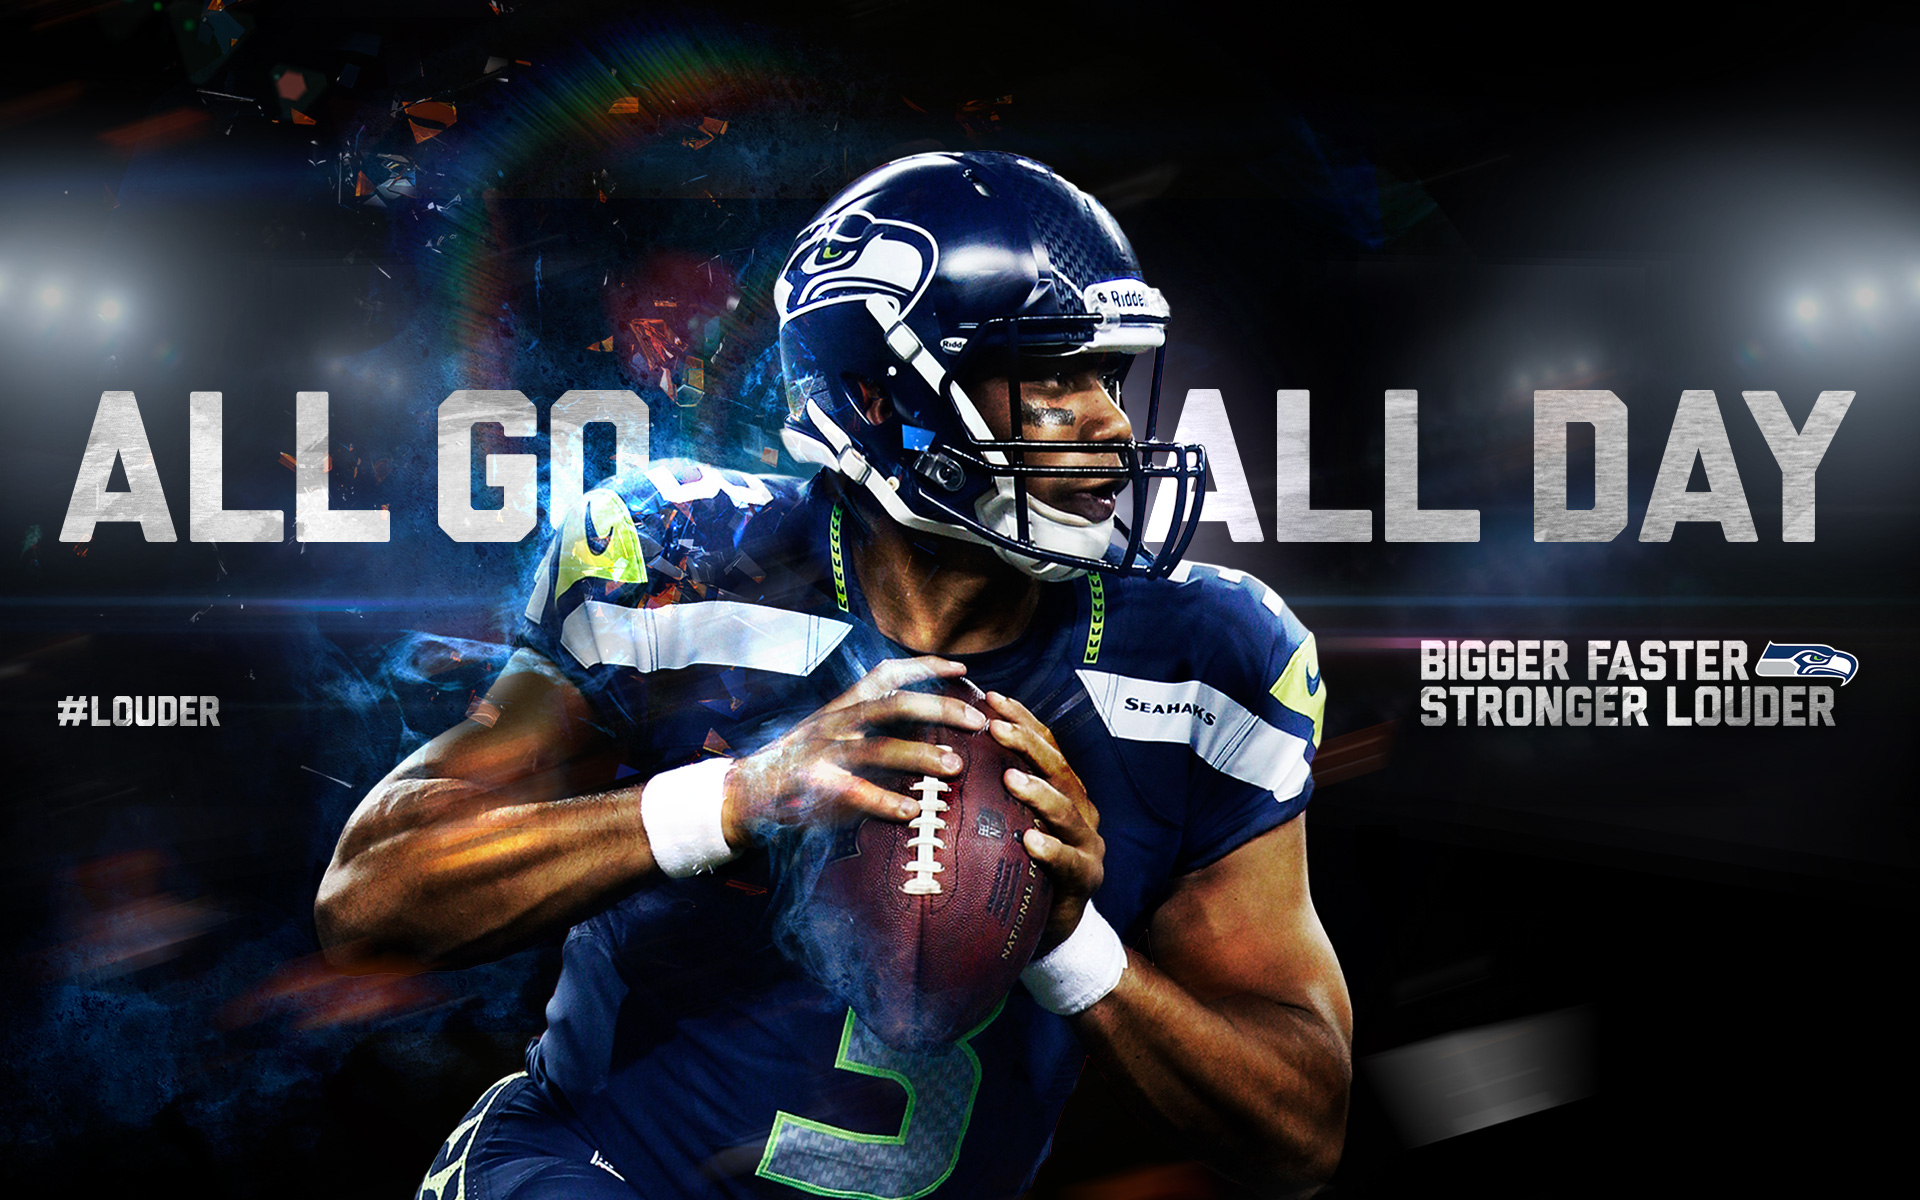 NFL Backgrounds | Wallpapers, Backgrounds, Images, Art Photos.